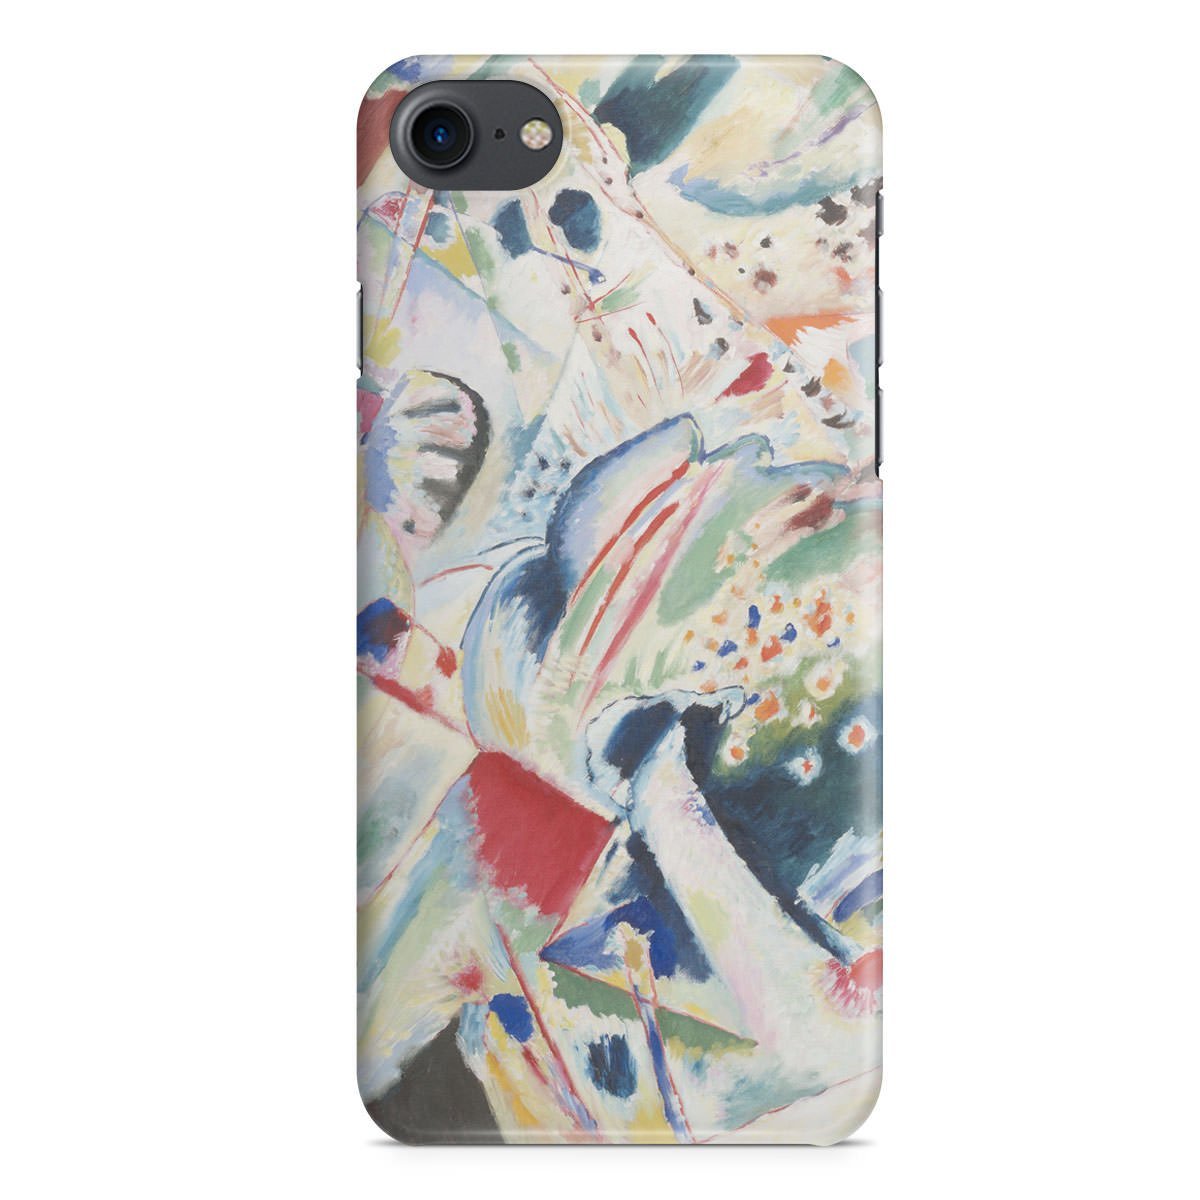 Queen of Cases Hard Shell Phone Case - Kandinsky Abstract Art Painting